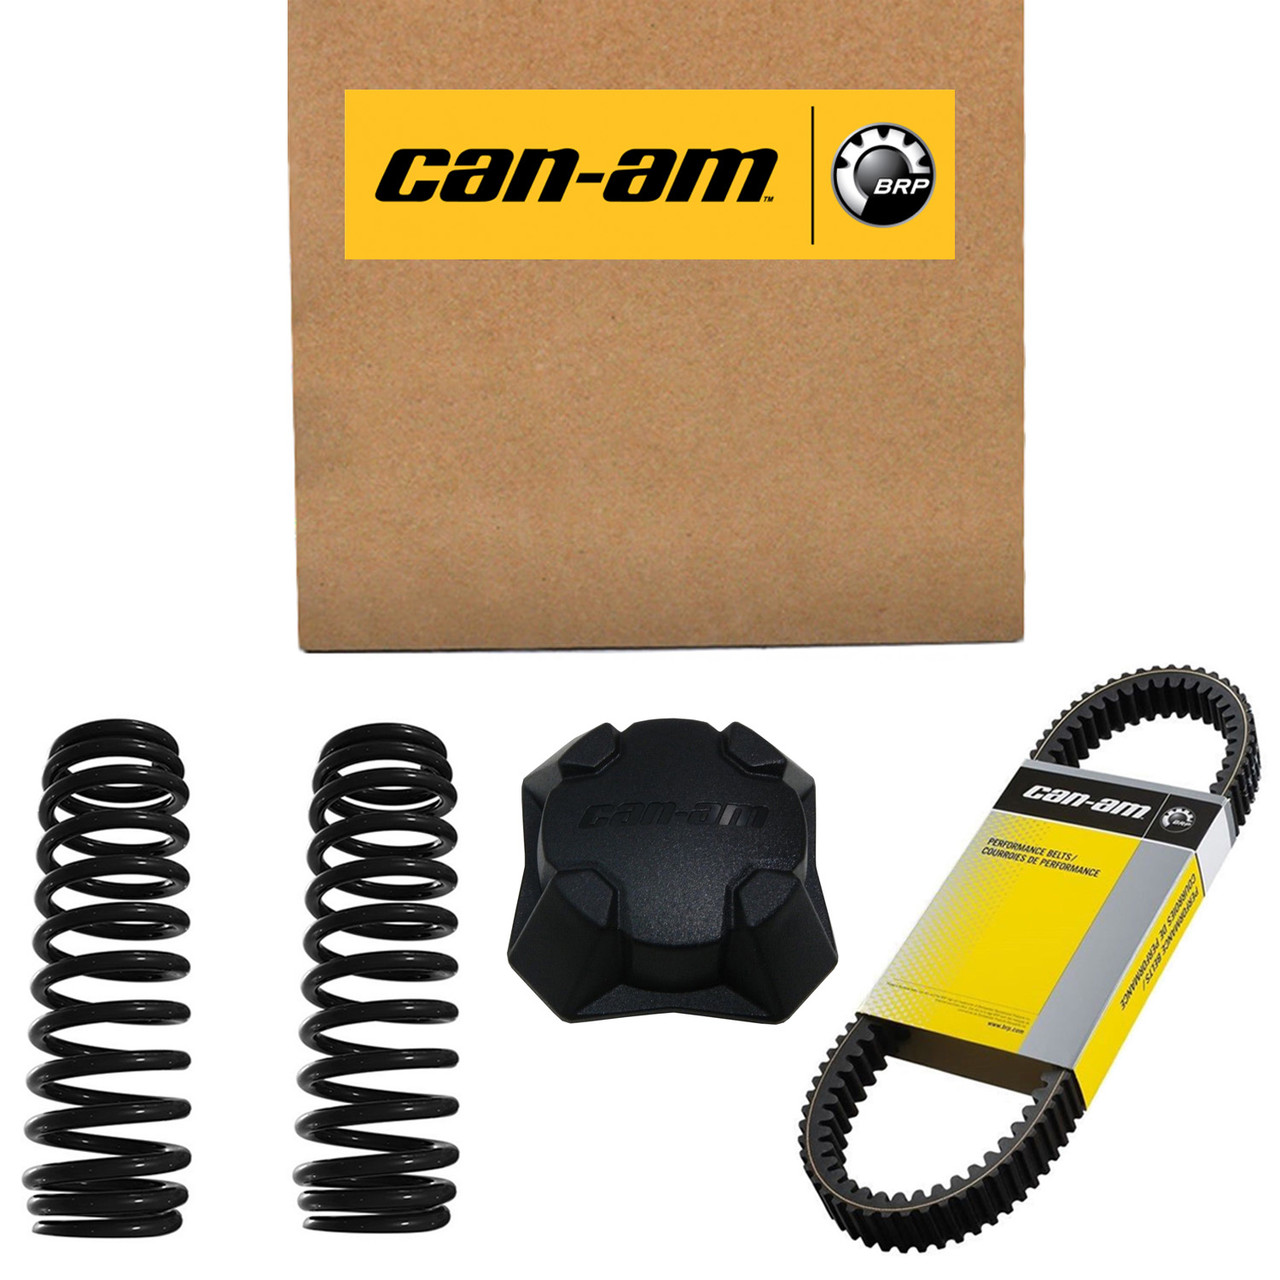 Can-Am New OEM To Cargo Harness, 710005357